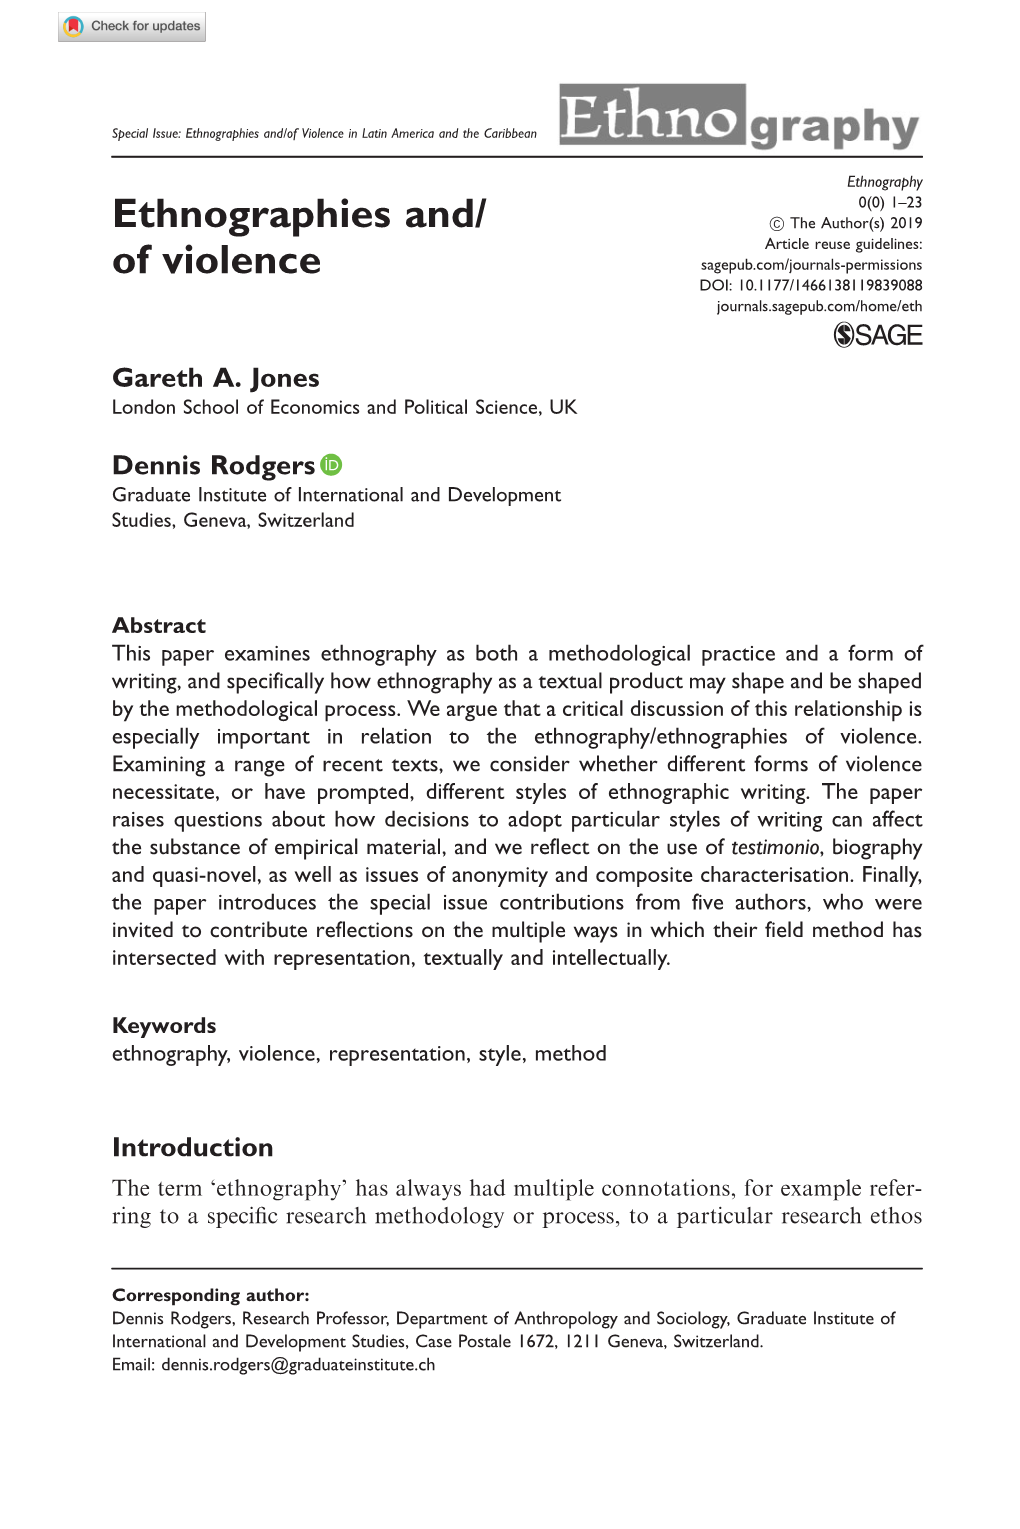 Ethnographies And/Of Violence in Latin America and the Caribbean